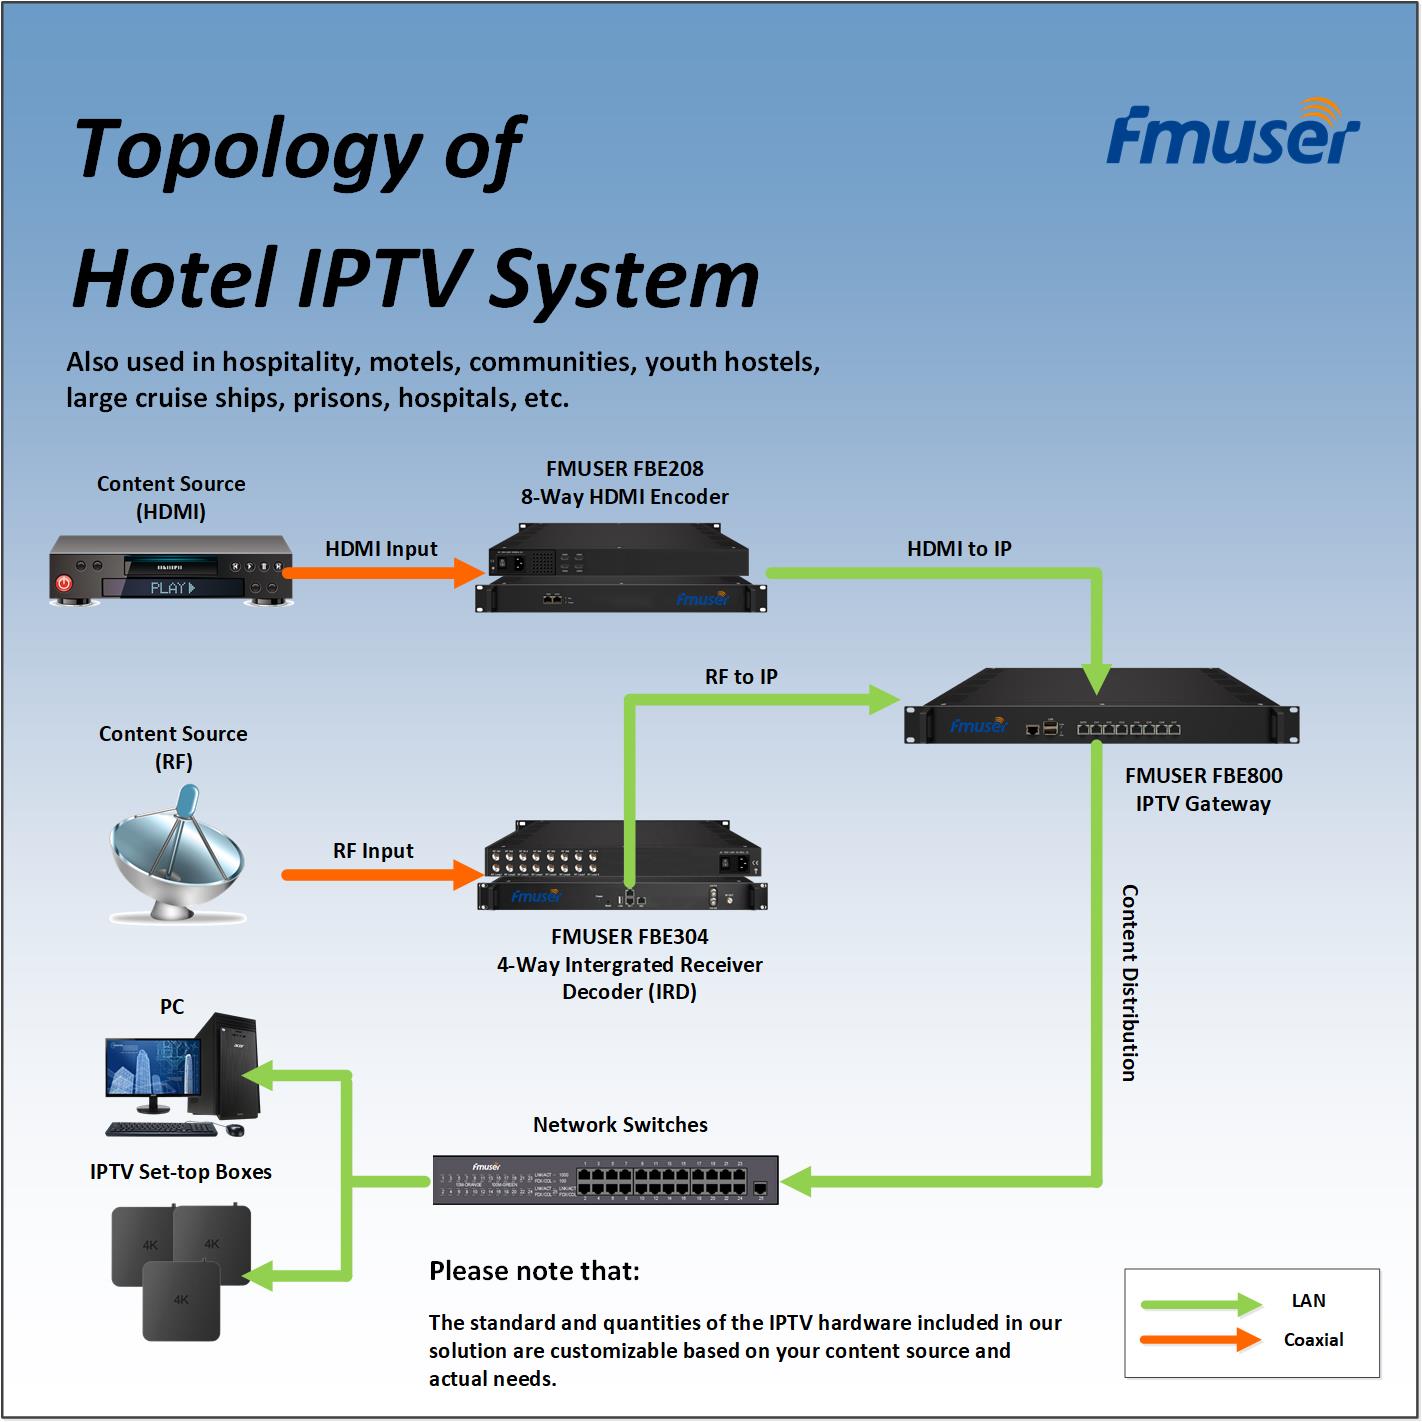 FMUSER Introduces an Turnkey Hotel IPTV Solution for the Hospitality Sector with Full IPTV Hardware and Content Distribution System